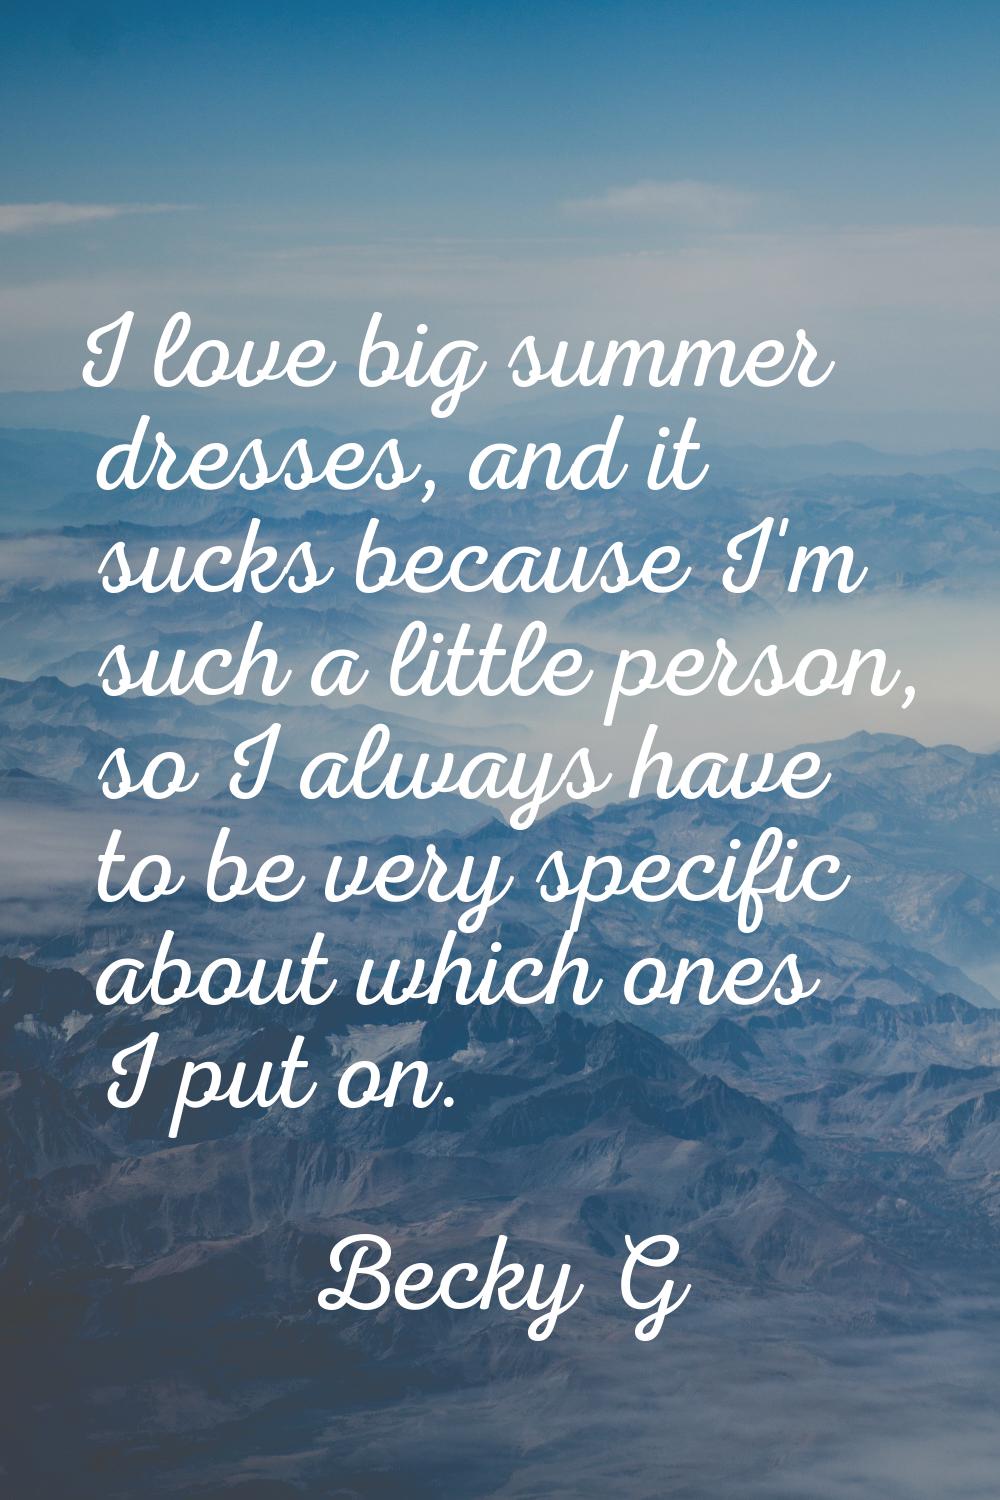 I love big summer dresses, and it sucks because I'm such a little person, so I always have to be ve